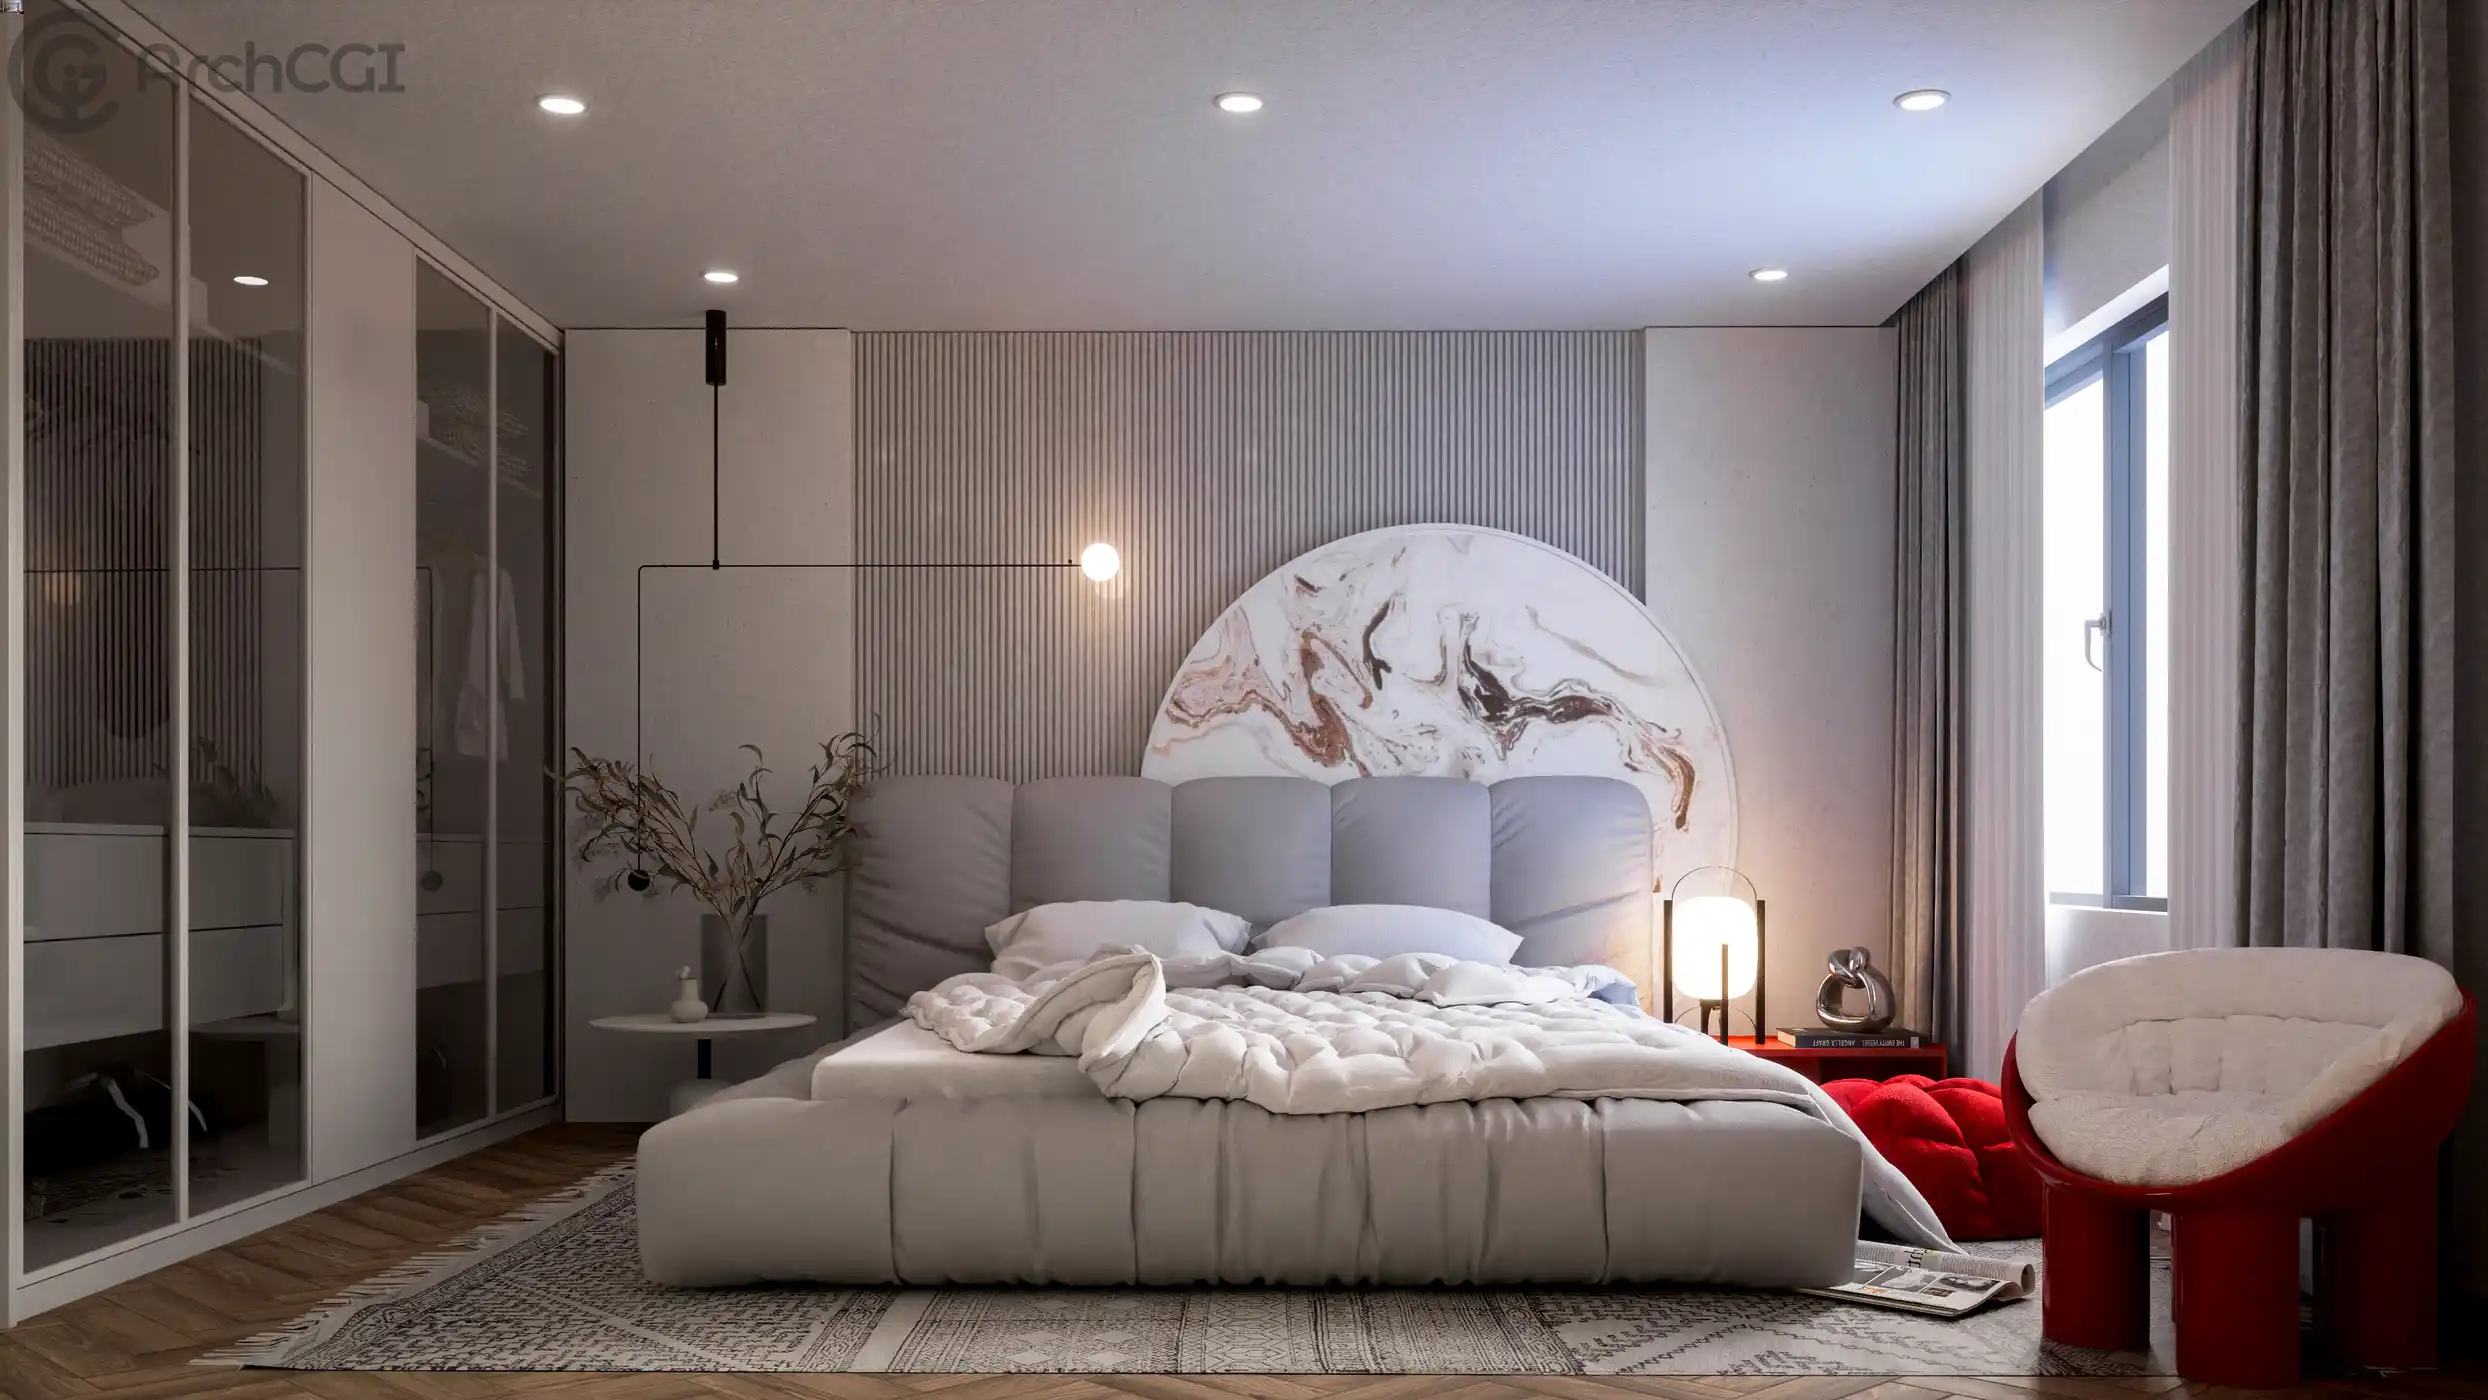 Highly Comfortable Bedroom | Better sleep due to better interior design | ArchCGI